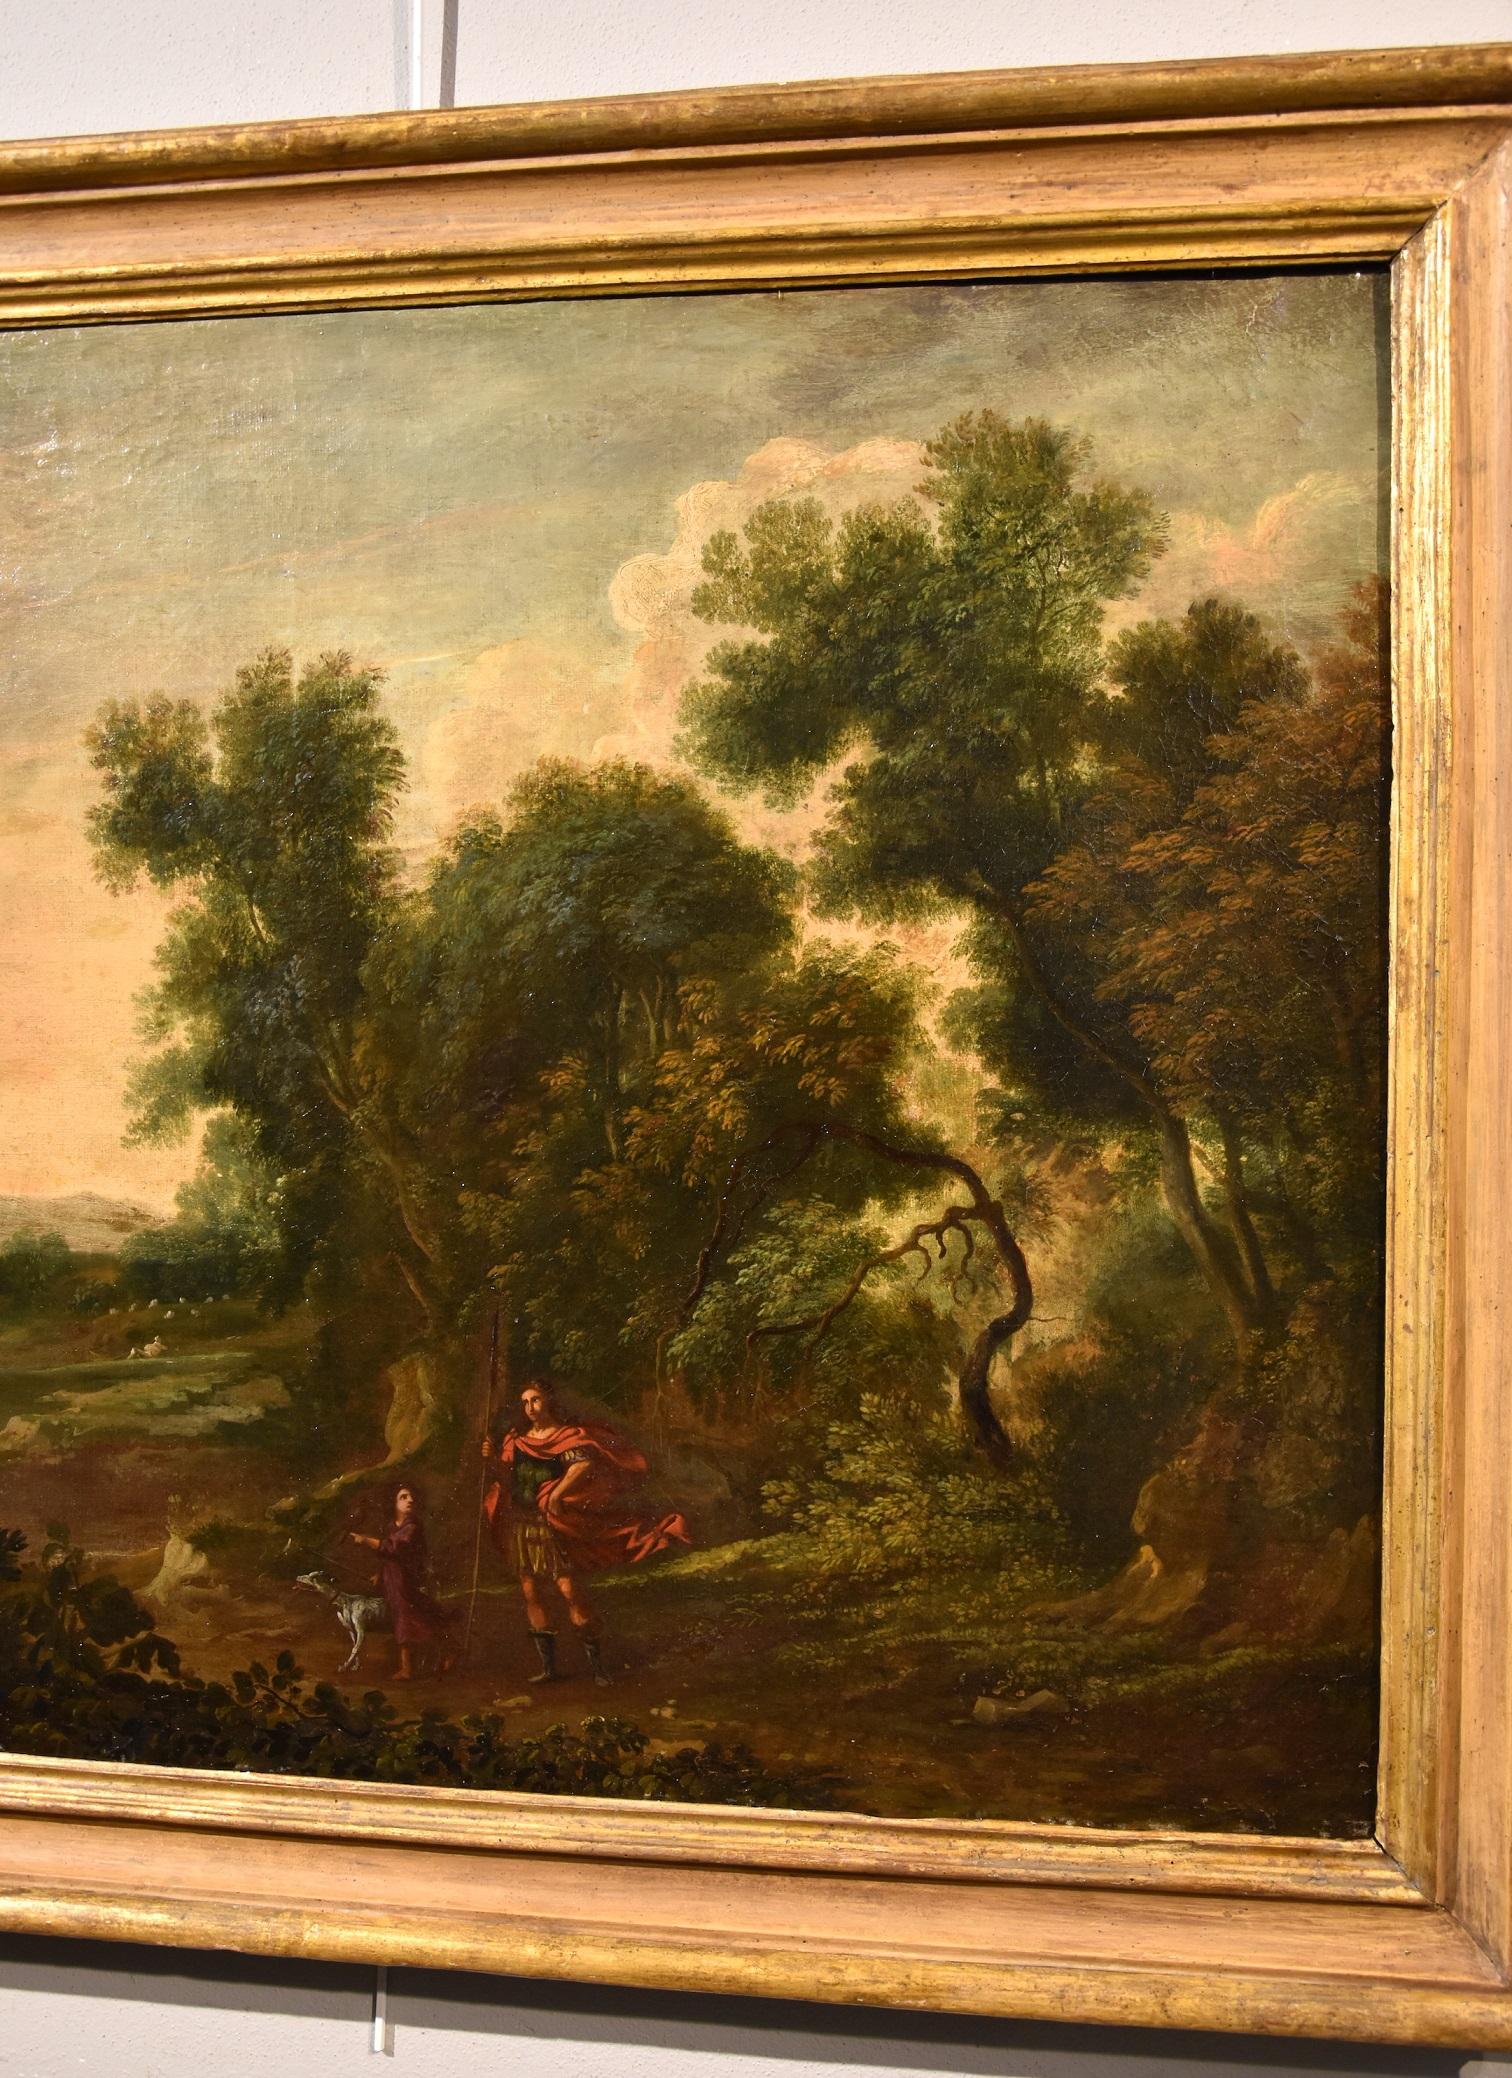 Dughet Woodland Landscape Old master Paint Oil on canvas 17th Century Italy Art - Old Masters Painting by Gaspard Dughet, called Gaspard Poussin (Rome 1615 - 1675)